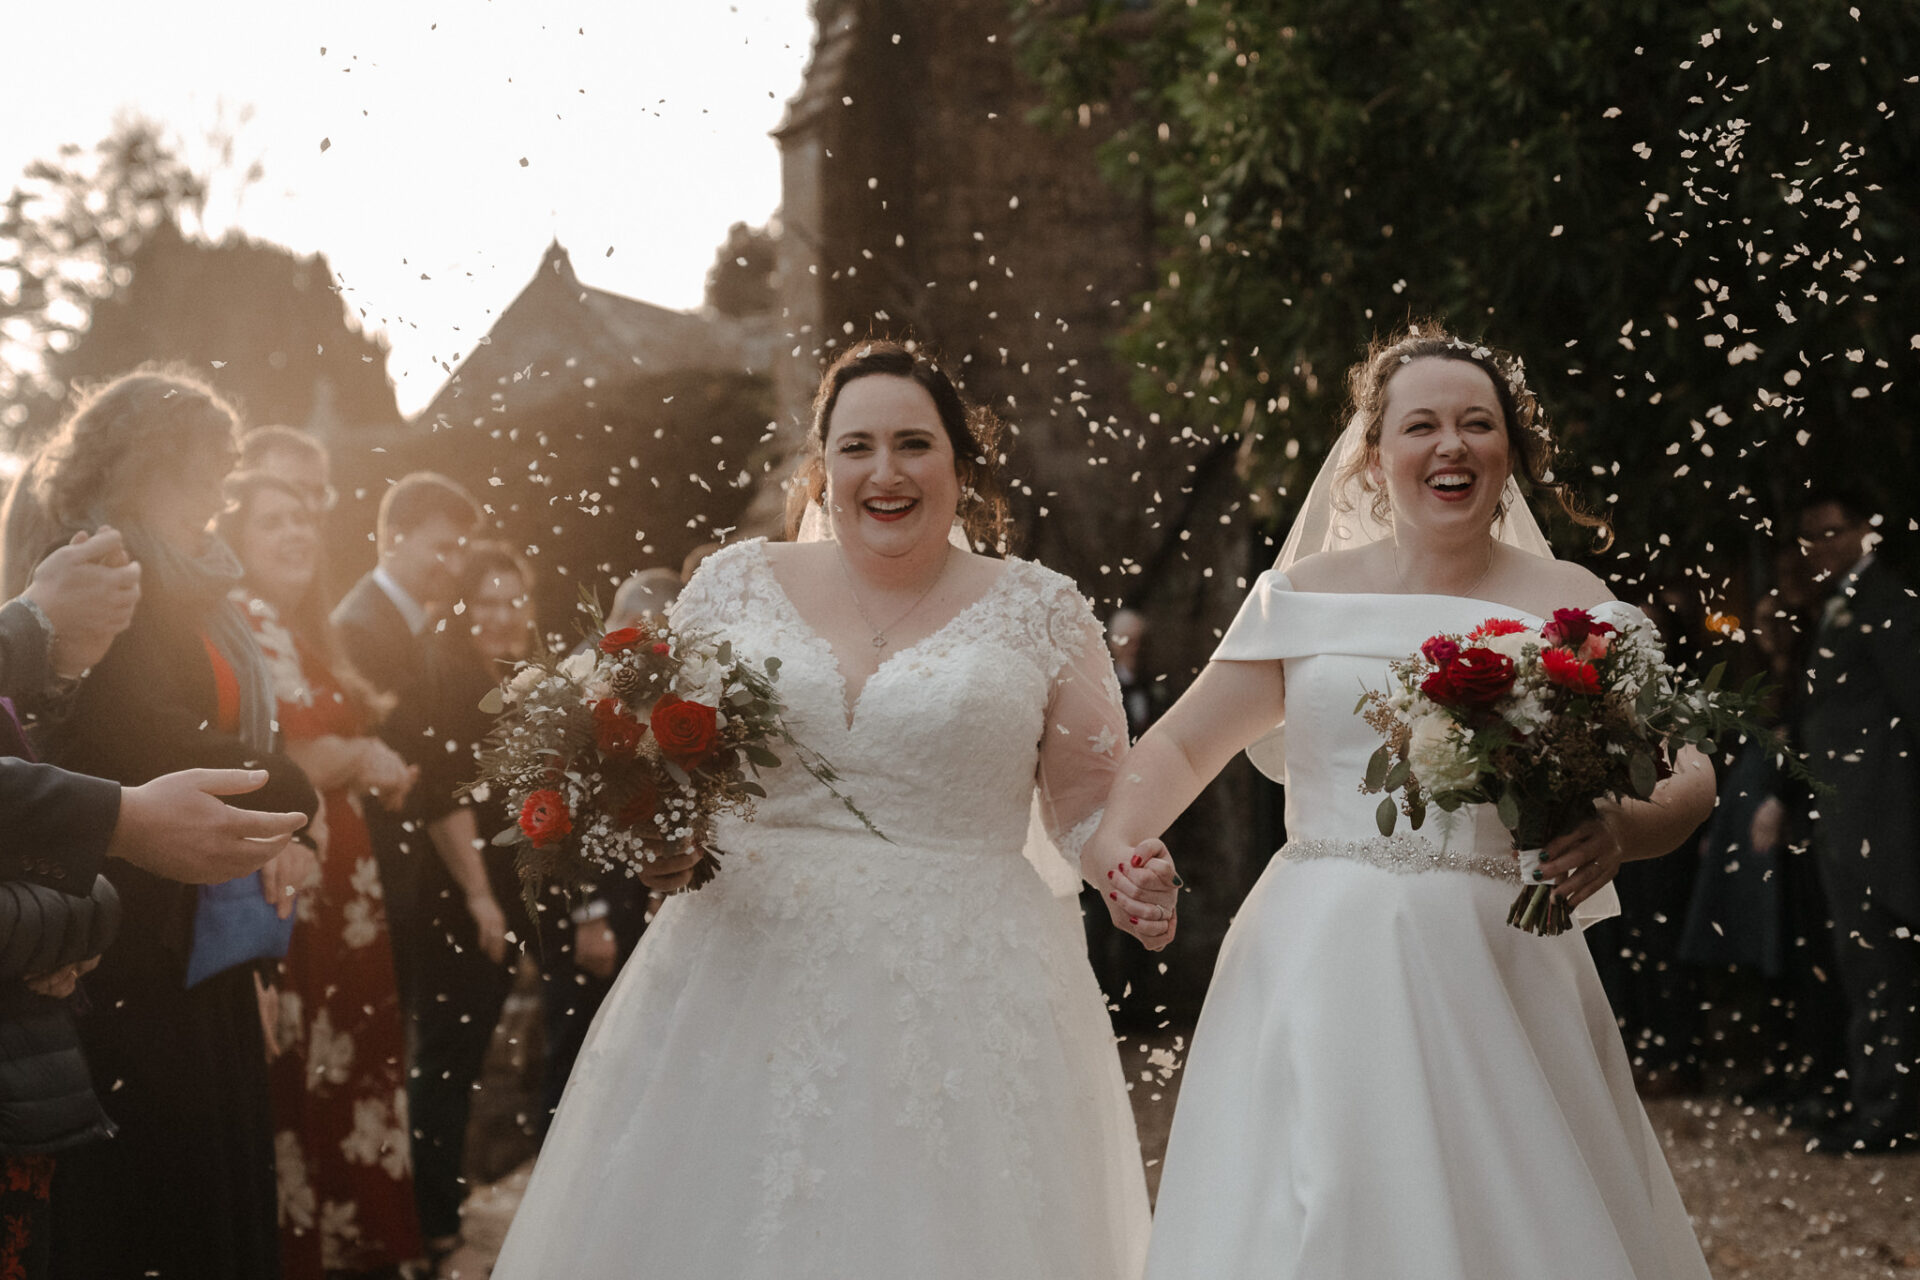 In recent weddings, two brides gracefully walk down the aisle while being showered in confetti.